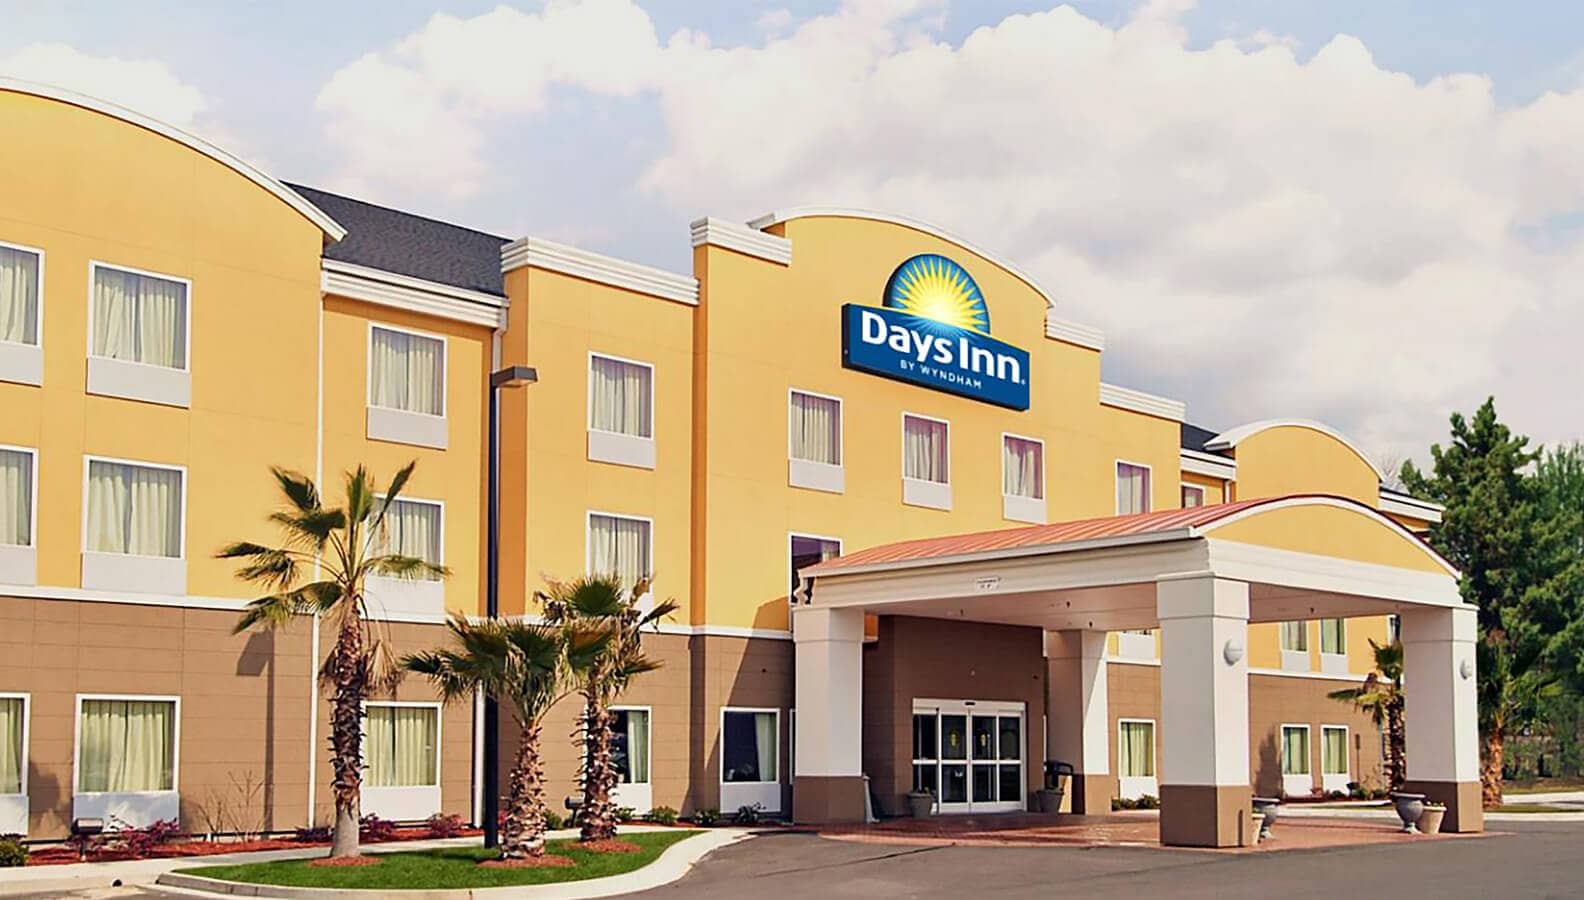 Wyndham Looks to Drive Corporate Travel with Newly Expanded Wyndham Direct Program